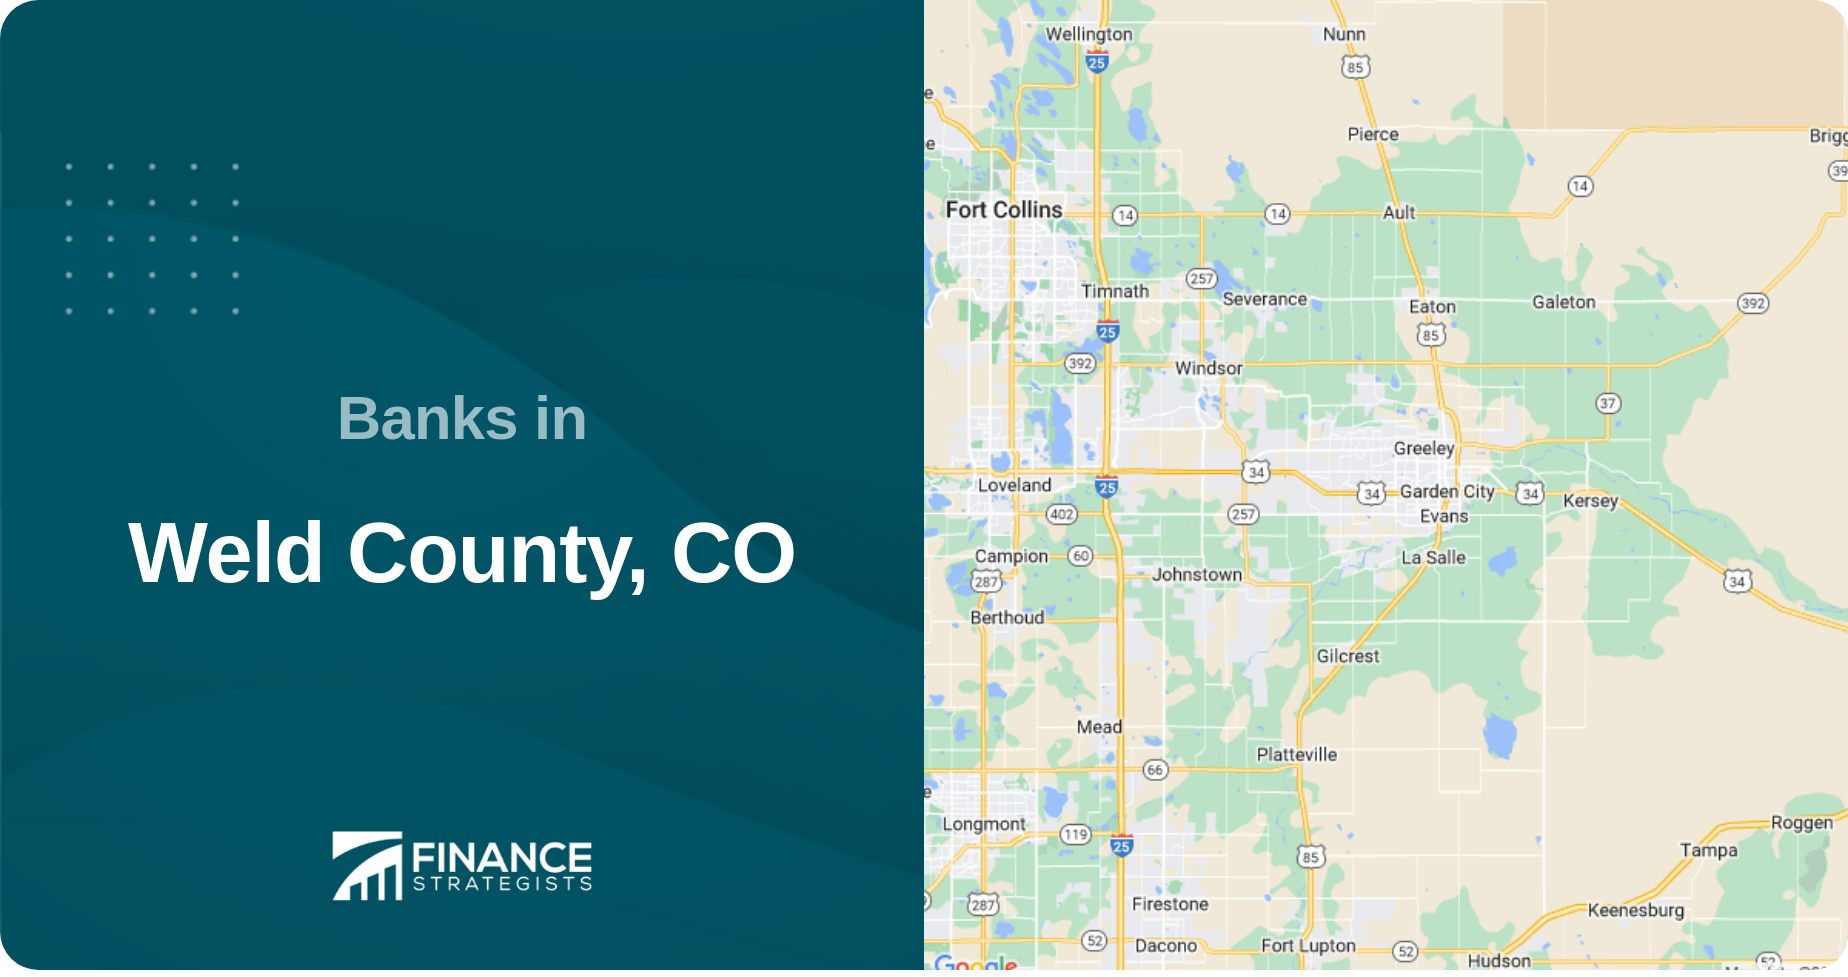 Banks in Weld County, CO